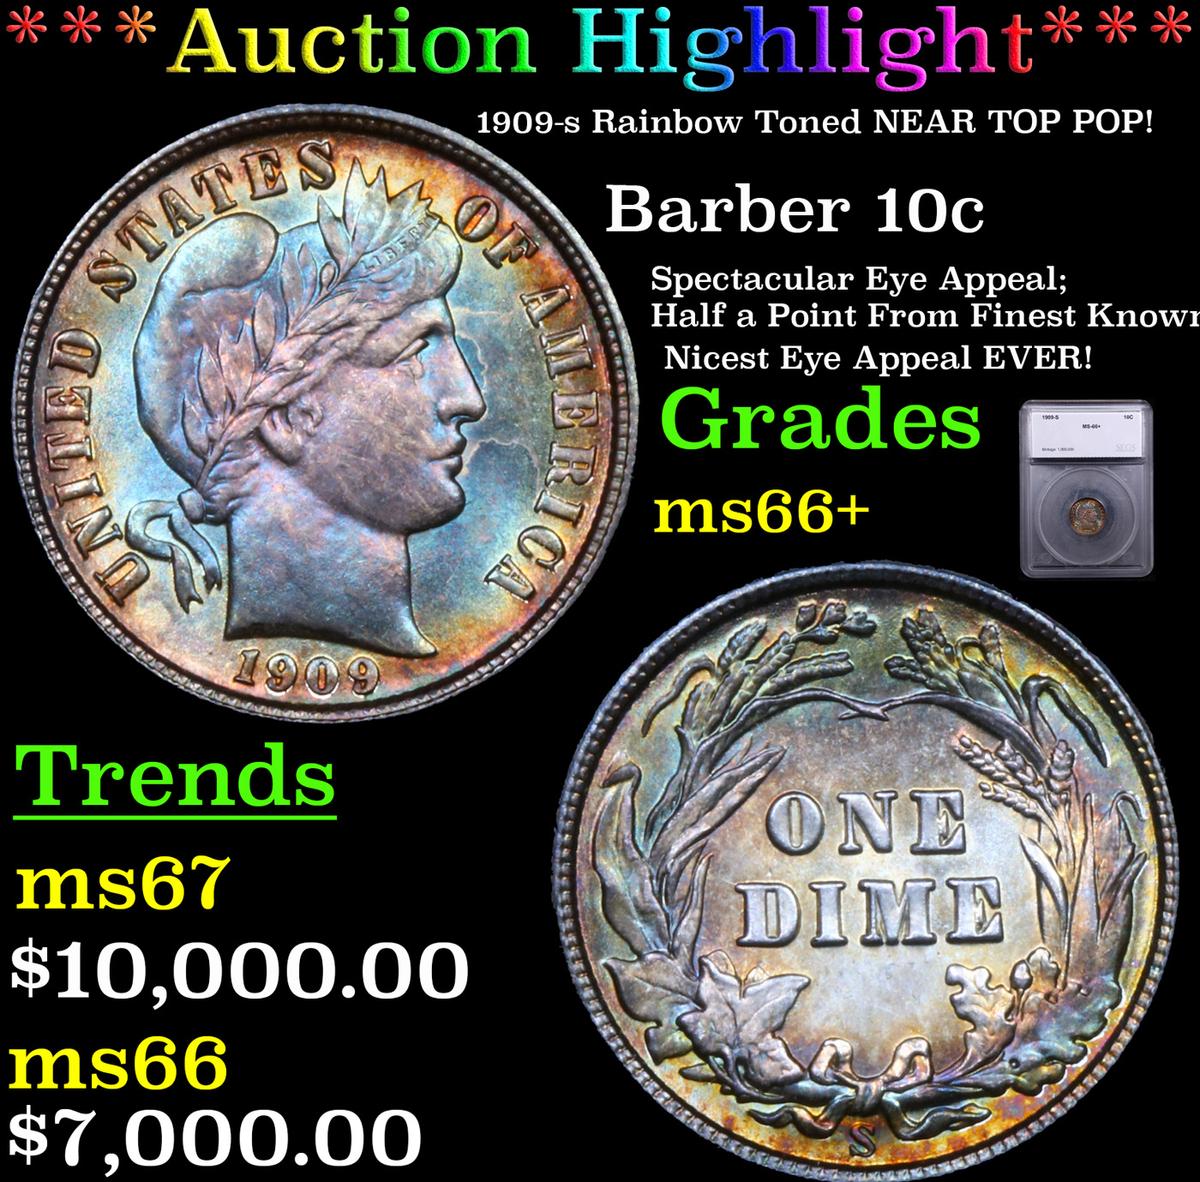 ***Auction Highlight*** 1909-s Barber Dime Rainbow Toned NEAR TOP POP! 10c Graded ms66+ BY SEGS (fc)